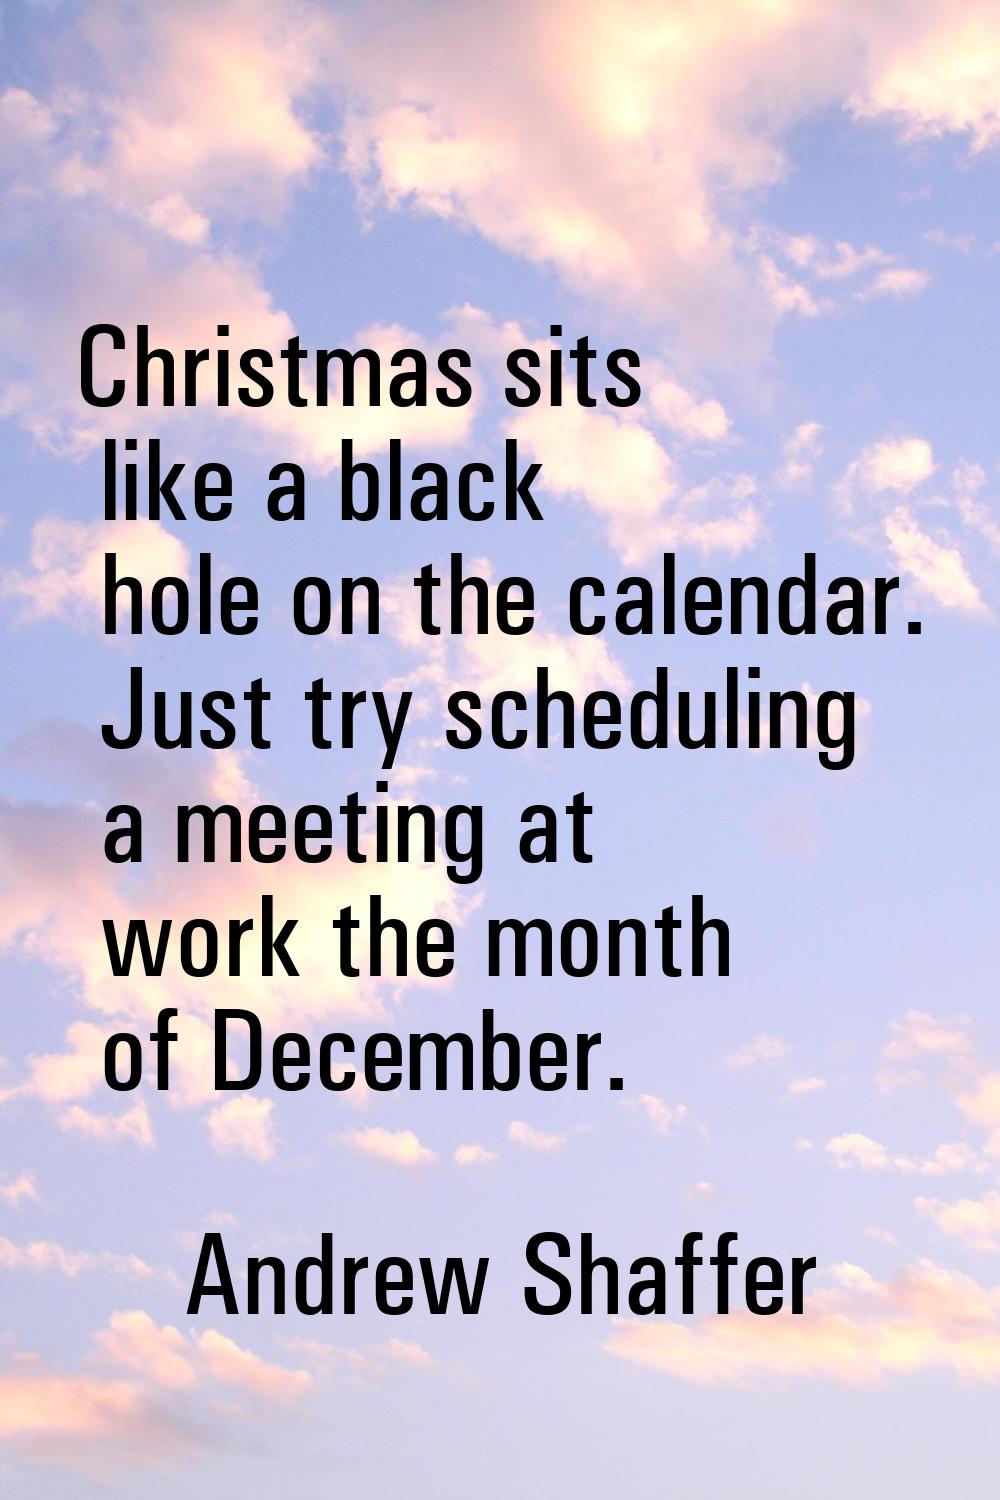 Christmas sits like a black hole on the calendar. Just try scheduling a meeting at work the month o